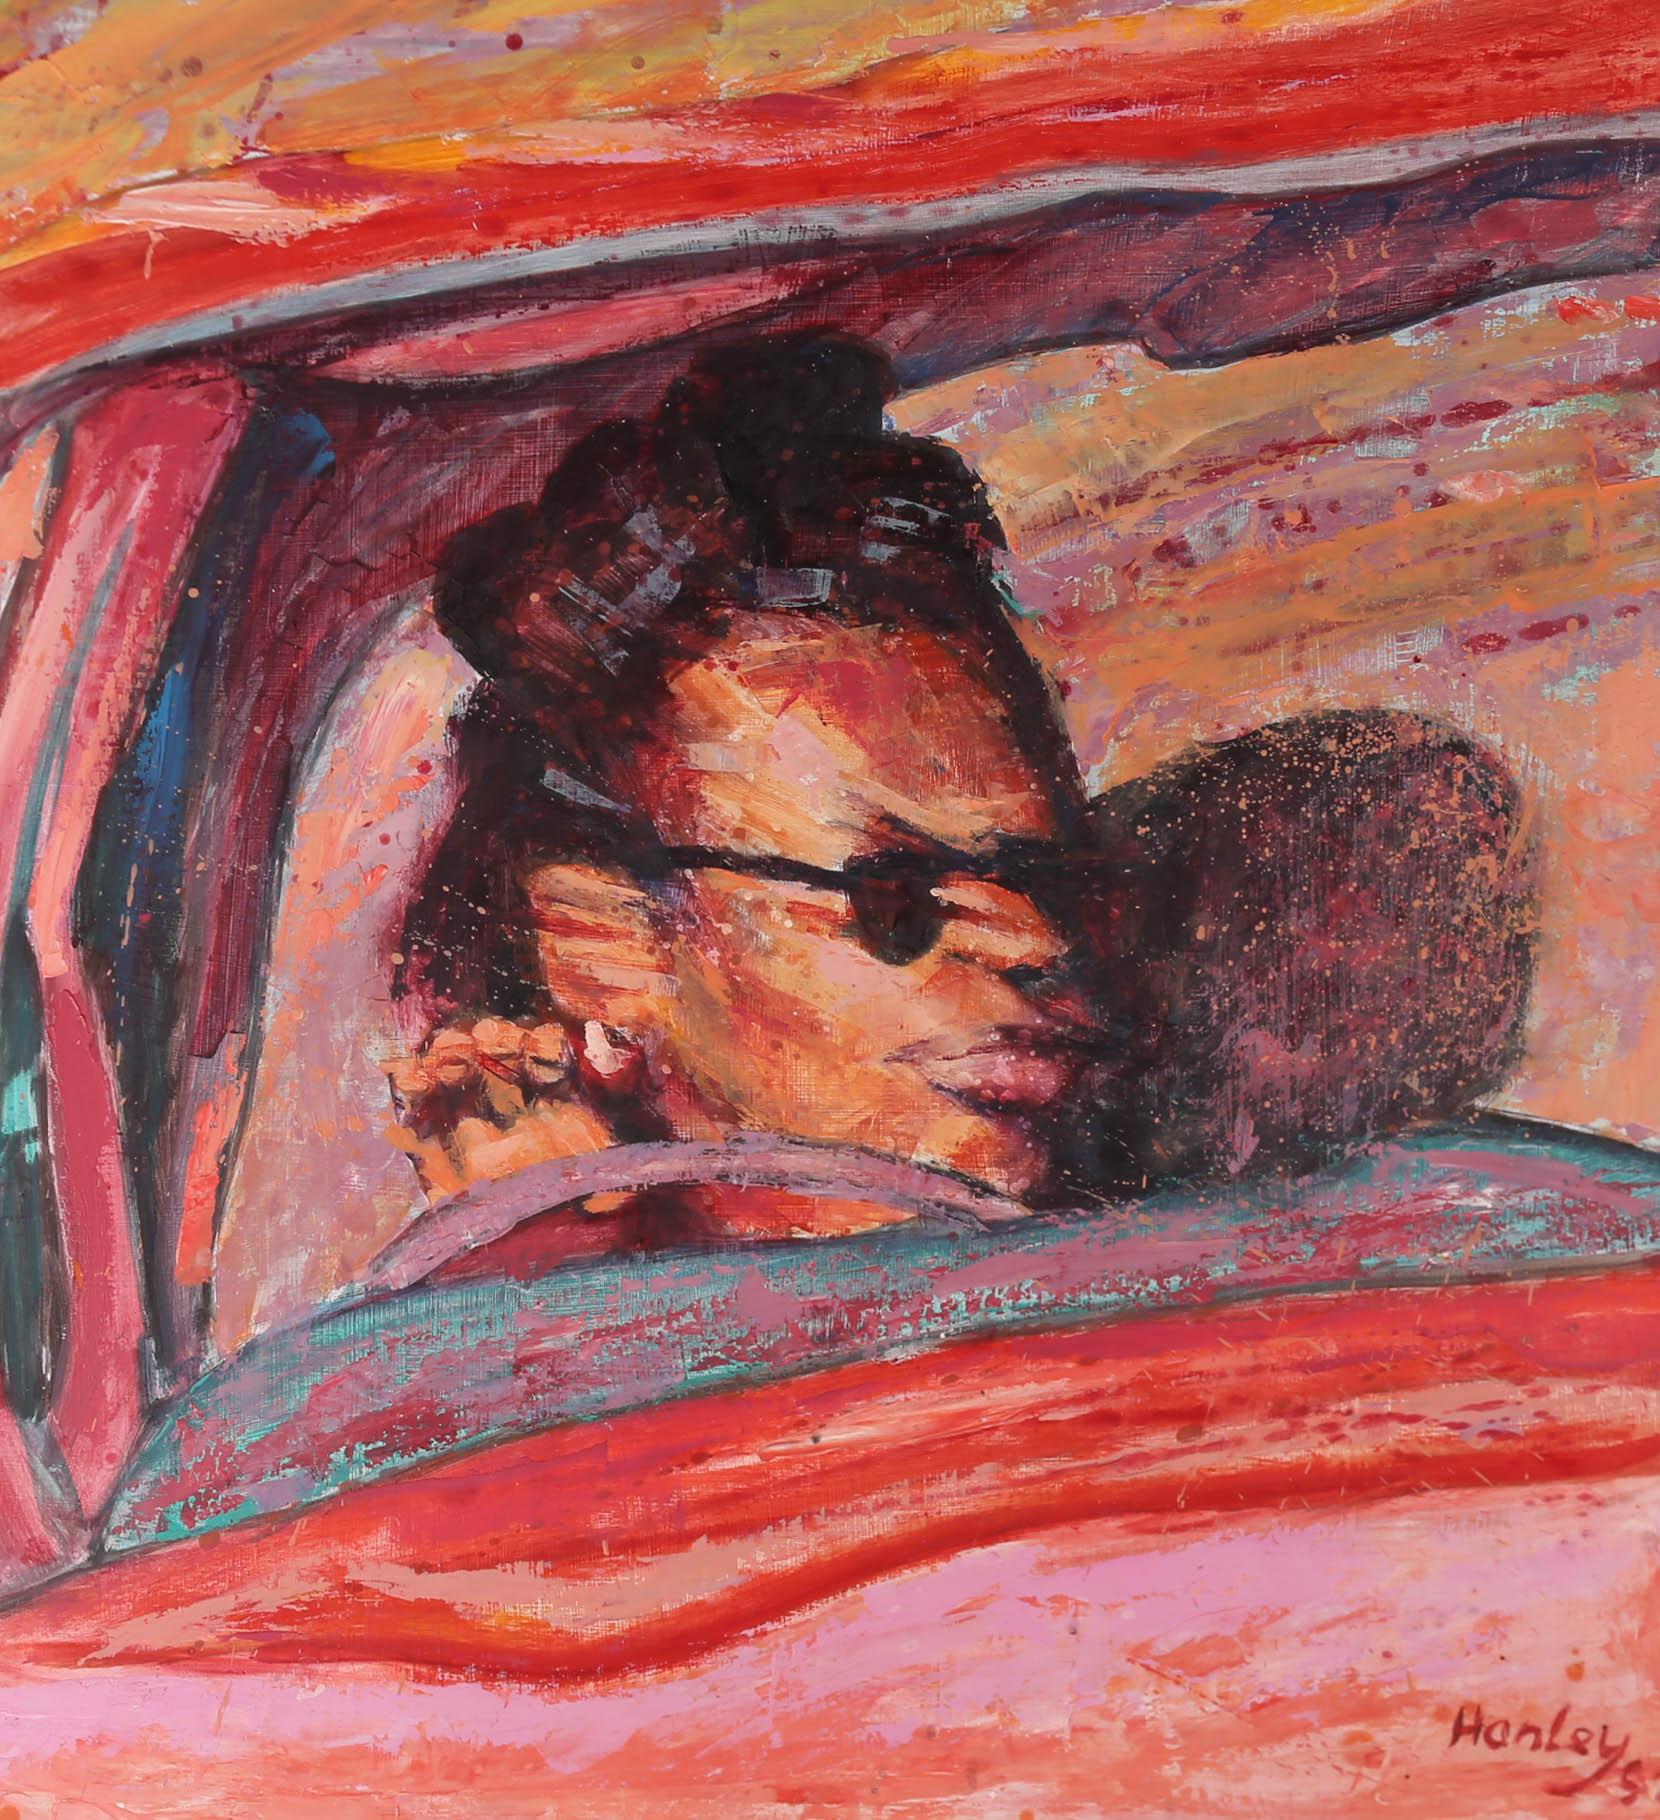 A striking portrait depicting a woman in the driver's seat of a car. The artist uses vibrant colour and expressive brush work to create fun, bright portrait. Signed and dated to the lower right. Presented in a light wooden frame.